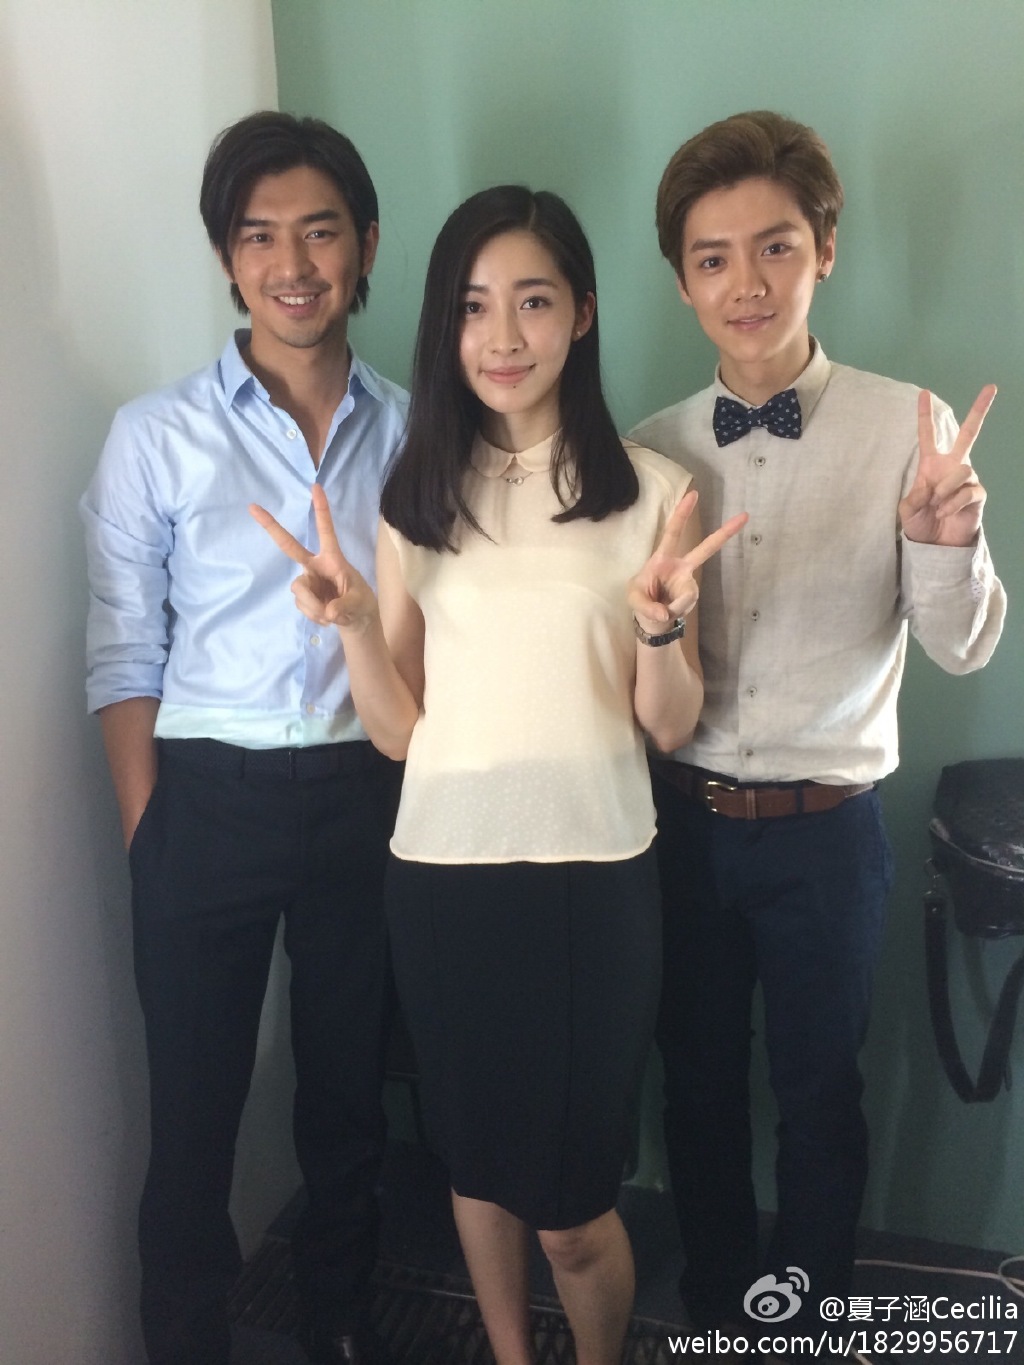 [OTHER] Luhan with Back to 20 cast and crew members [12P] 6d12ec6djw1eiswnjkye0j20xc18ggty